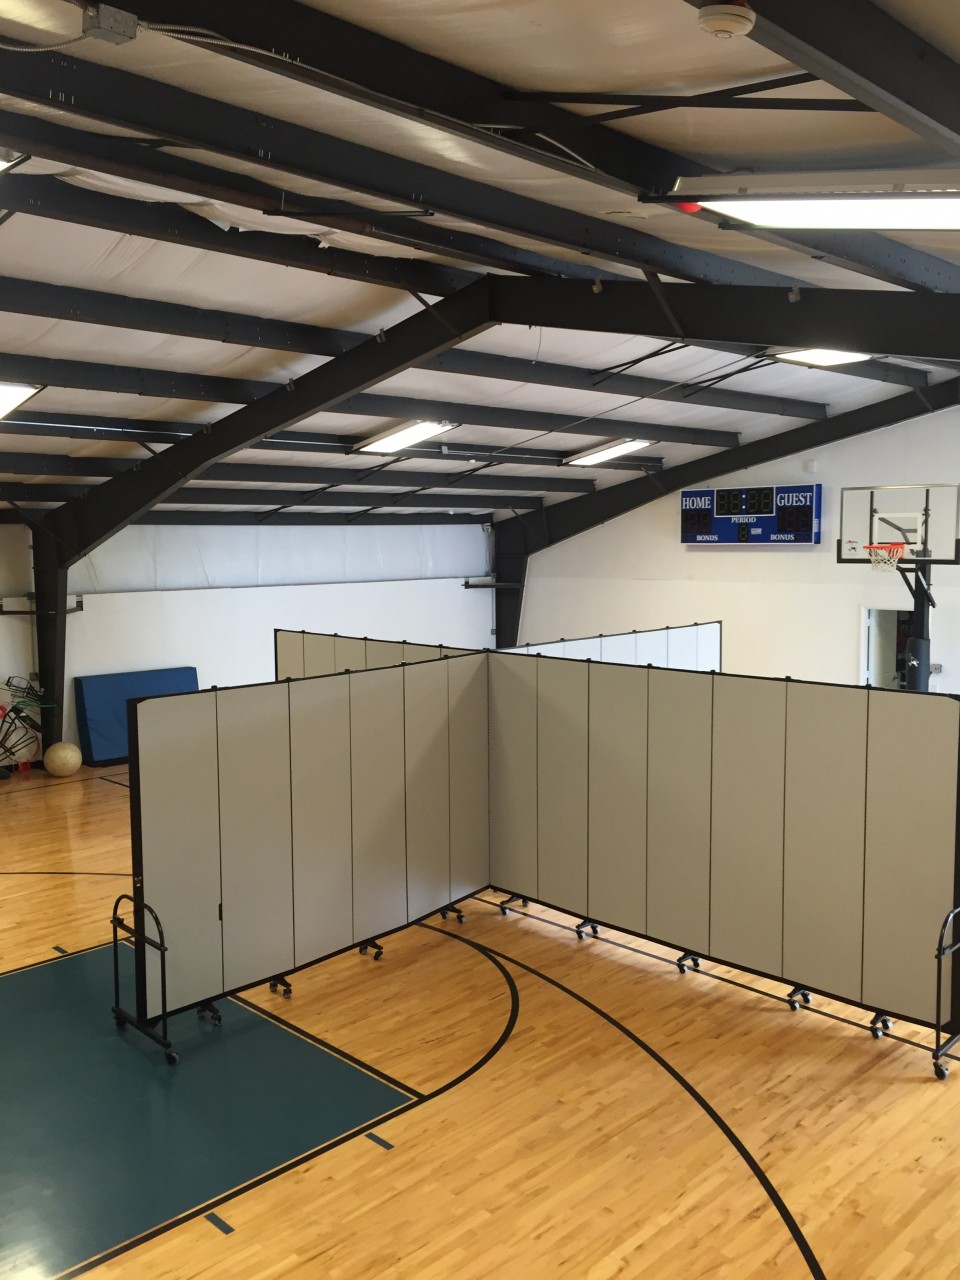 Two room dividers are connected to create 4 rooms in a gym